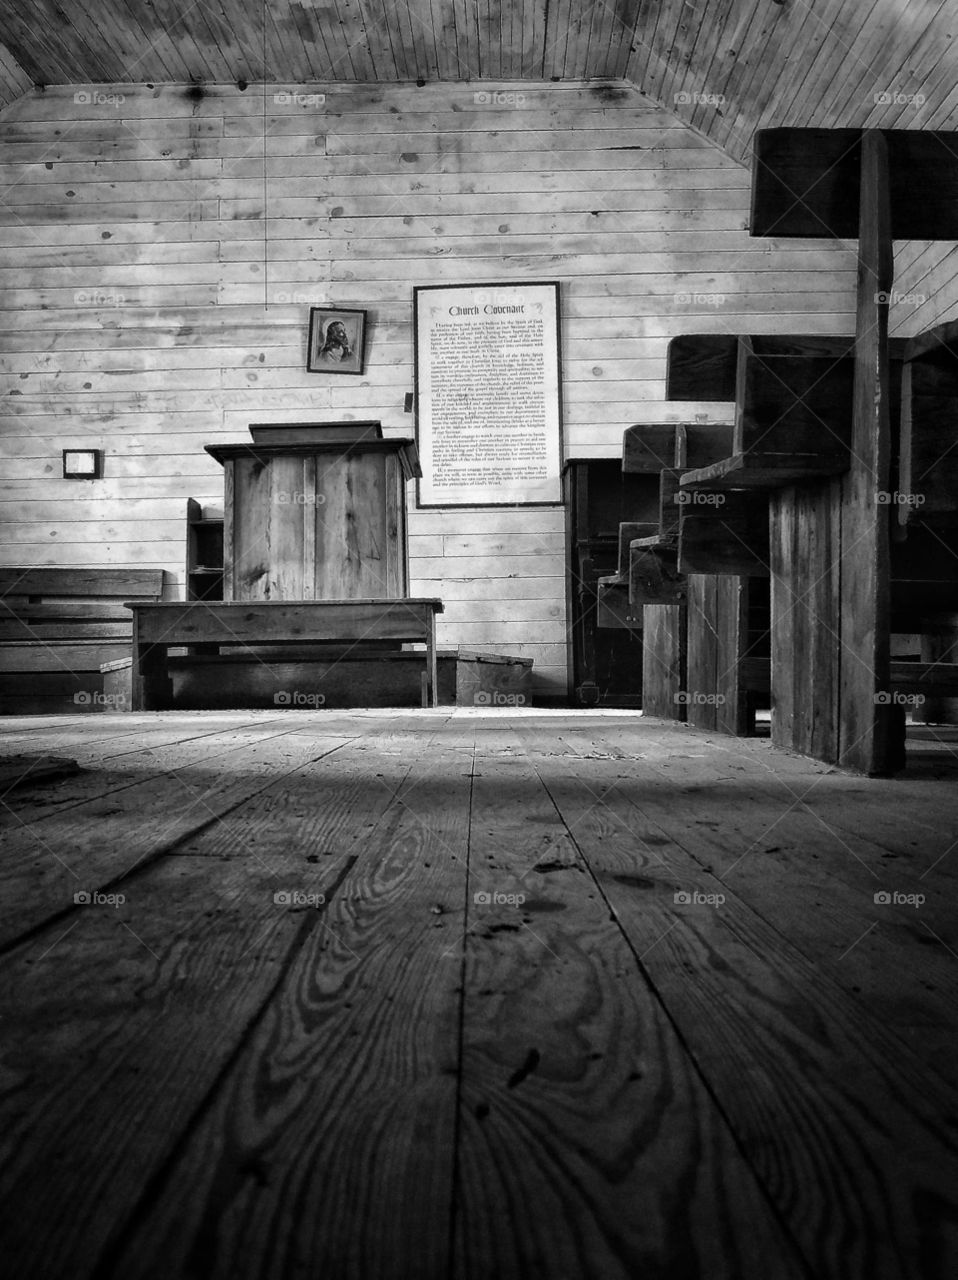 Inside of a old country church. This was the main meeting place for many people when the only mode of travel was horses and wagons. Think about how many people sang the songs and heard the preachers speak here. Timeless treasures. 